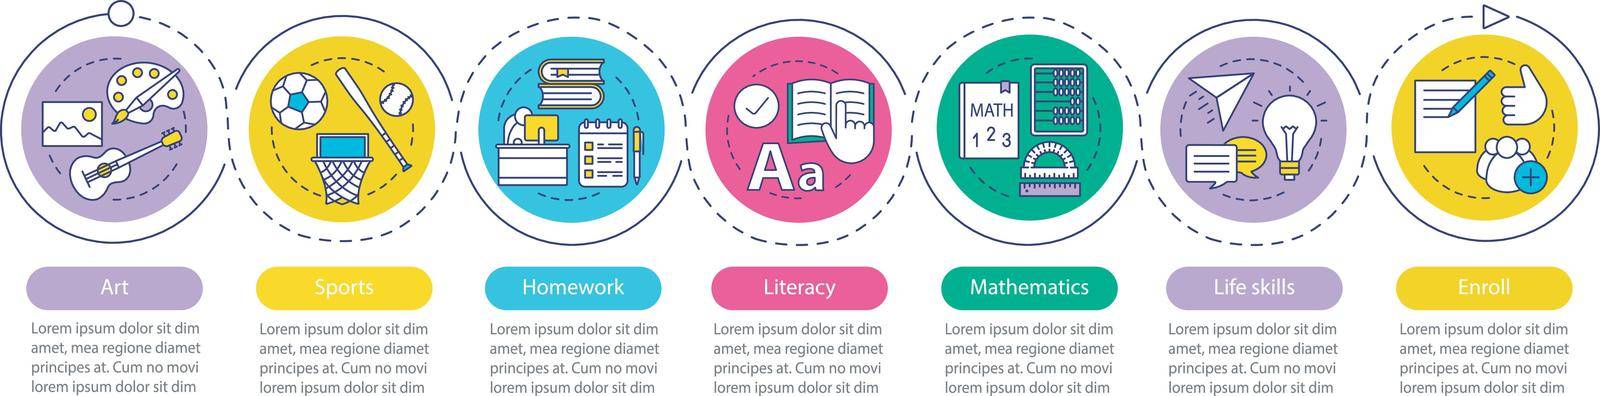 Human skills vector infographic template. Art, sports, homework, literacy, mathematics, life skills. Data visualization with seven steps and options. Process timeline chart. Workflow layout with icons